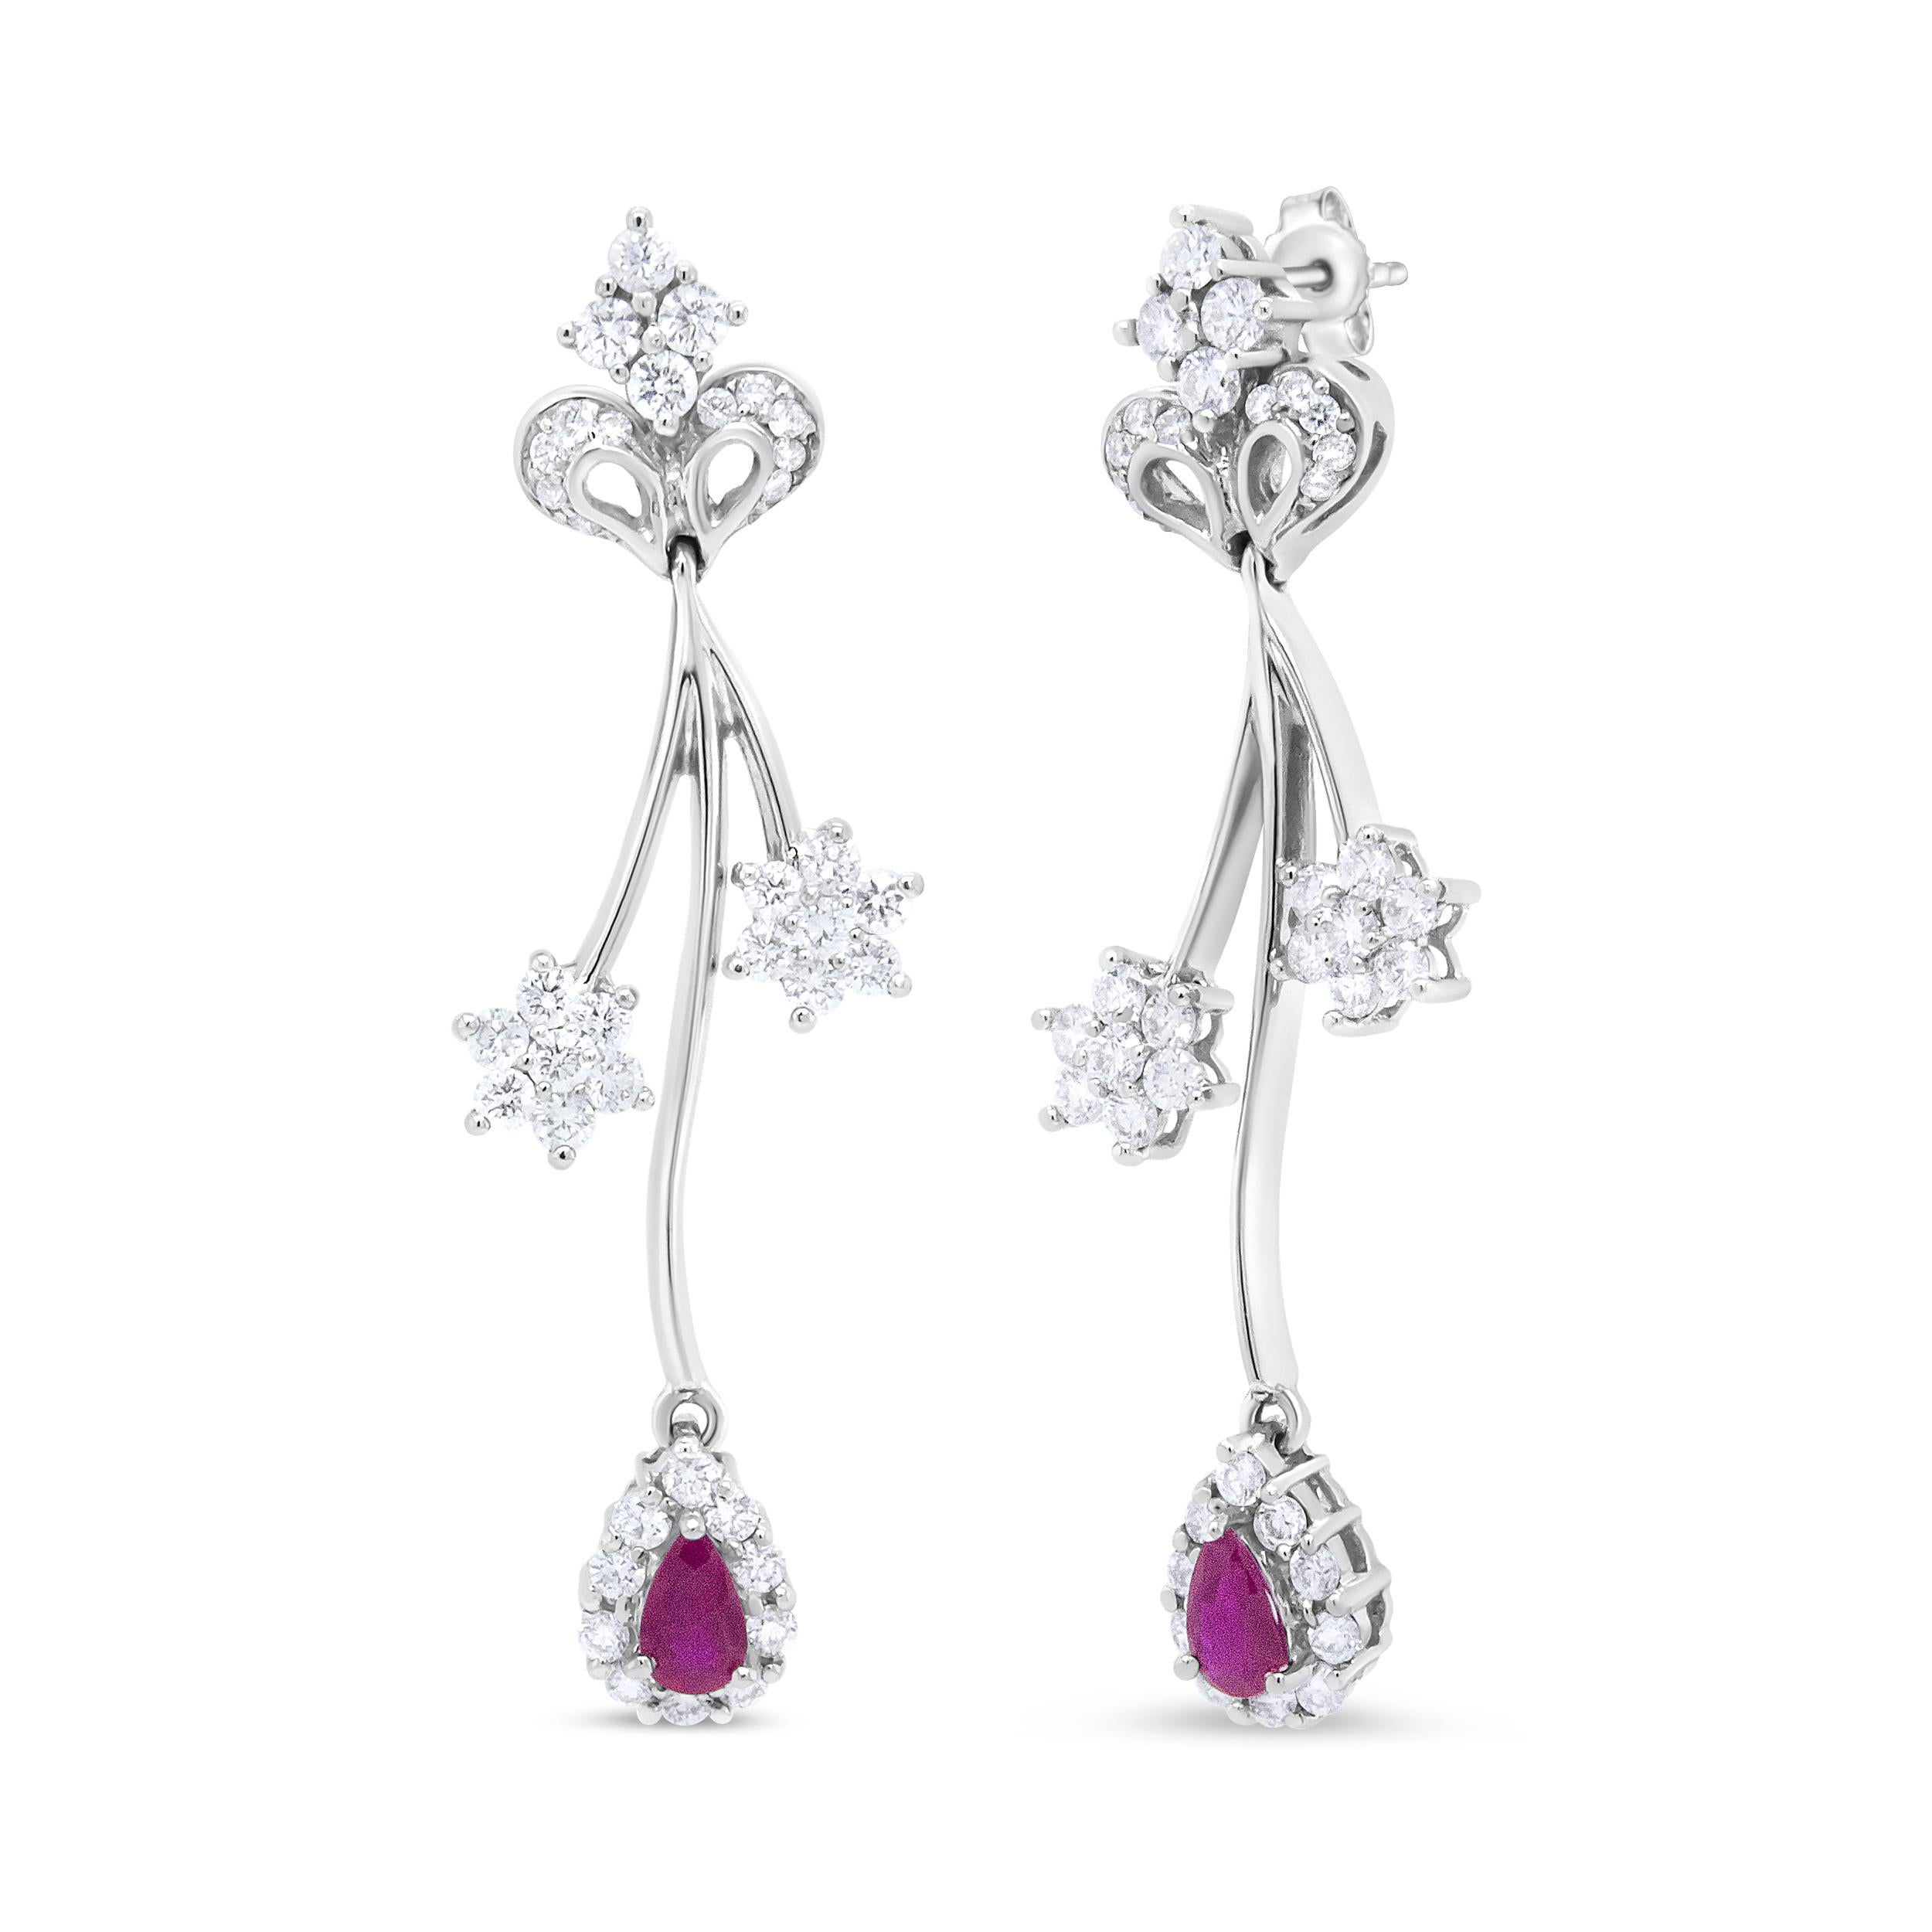 Express your individuality in this pair of 18k white gold freeform dangle drop earrings. The unique shape of these earrings features four prong-set diamonds that form a marquise-shaped 